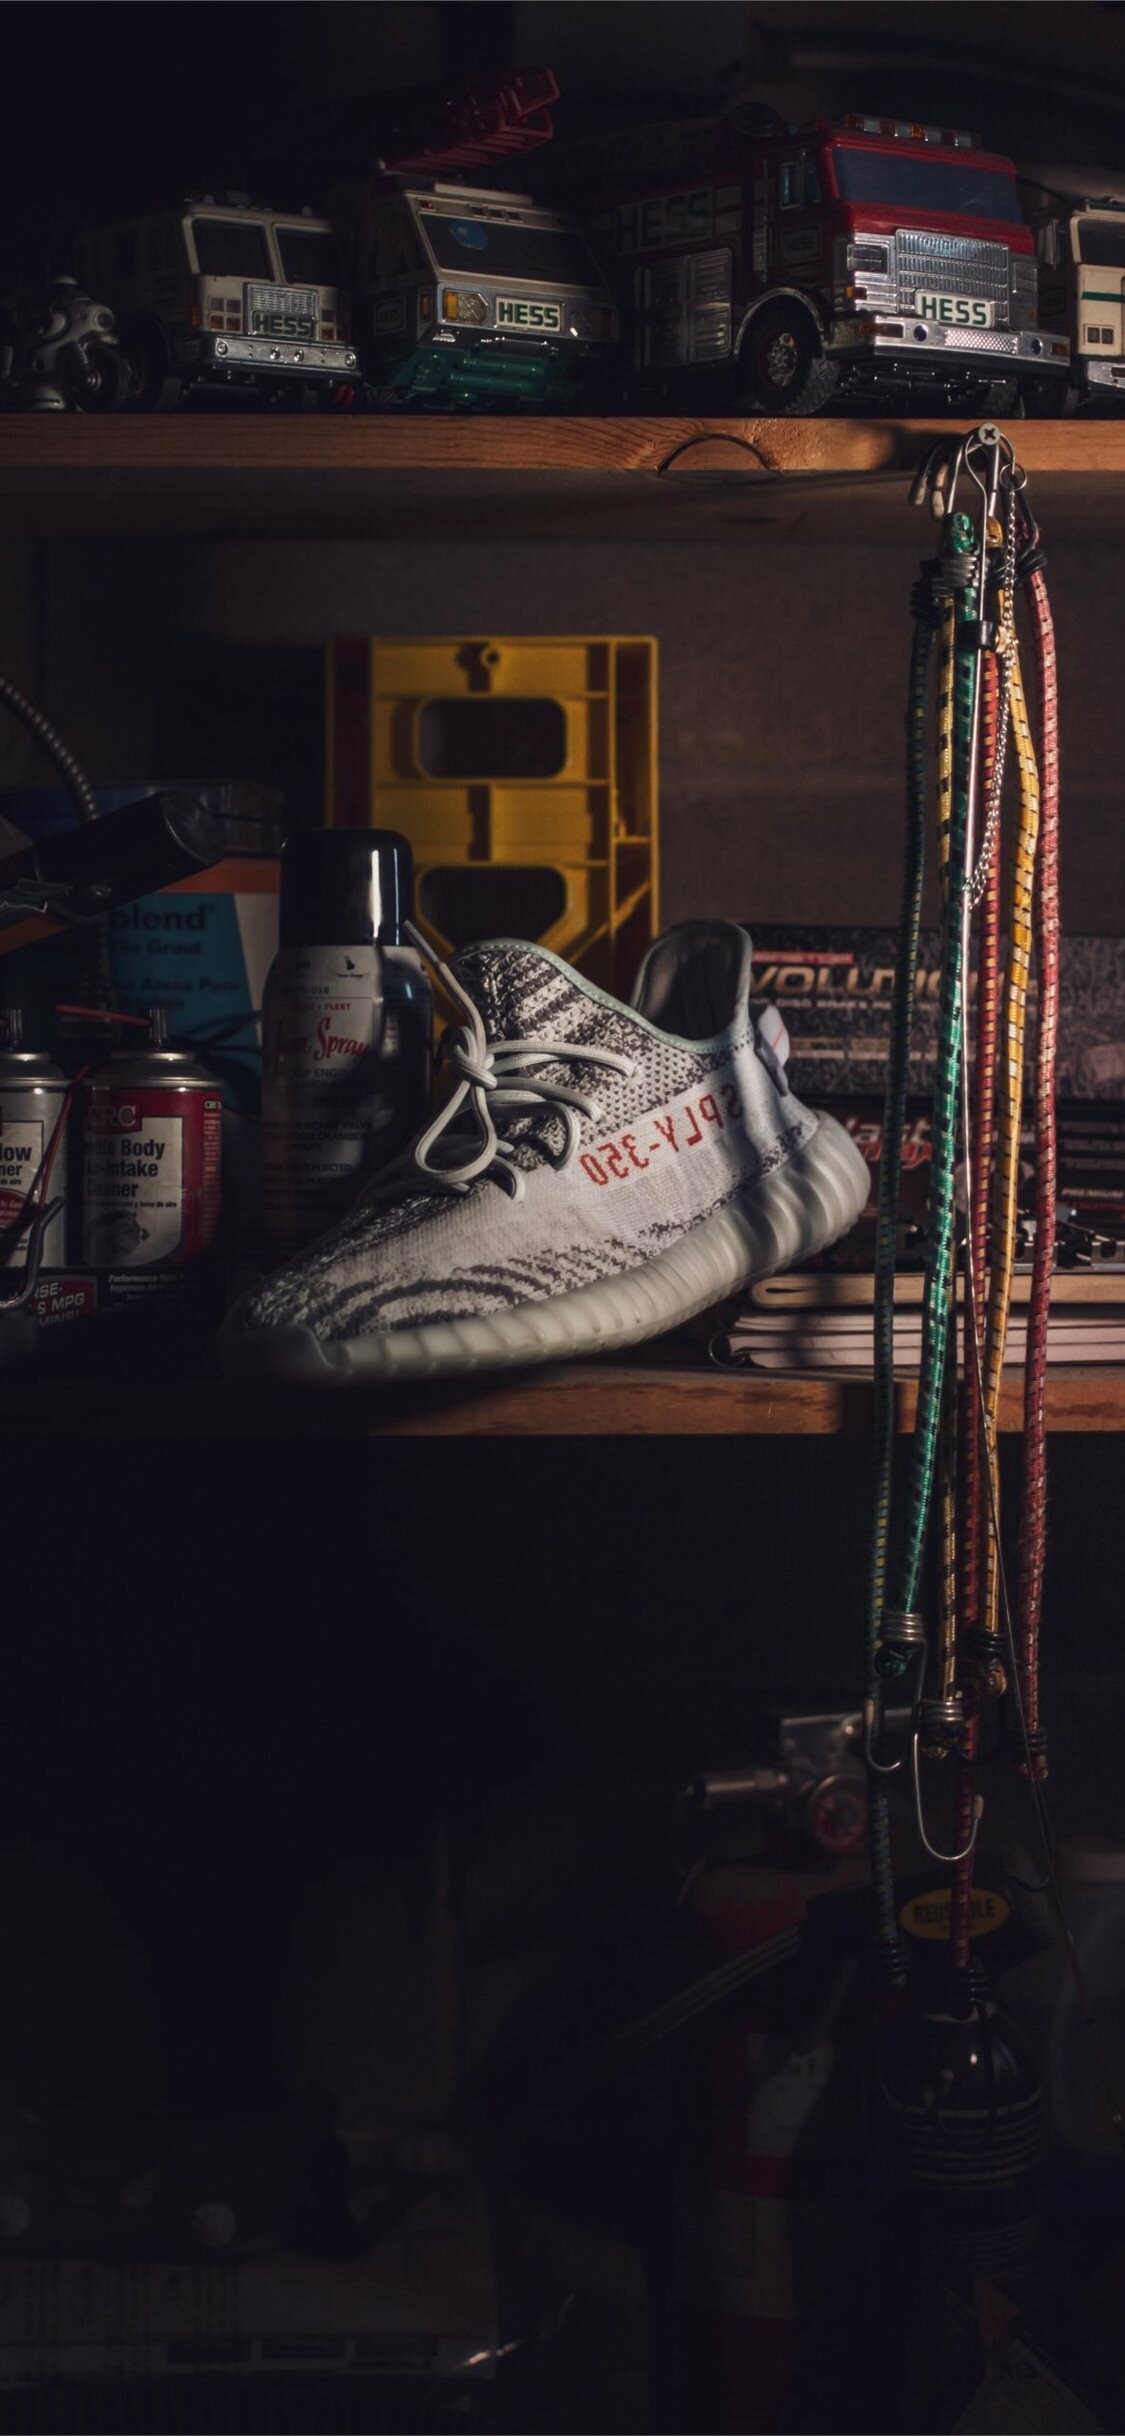 Yeezy: Boost 350 V2 debuted in a colorway called “Beluga” on September 24, 2016. 1130x2440 HD Wallpaper.